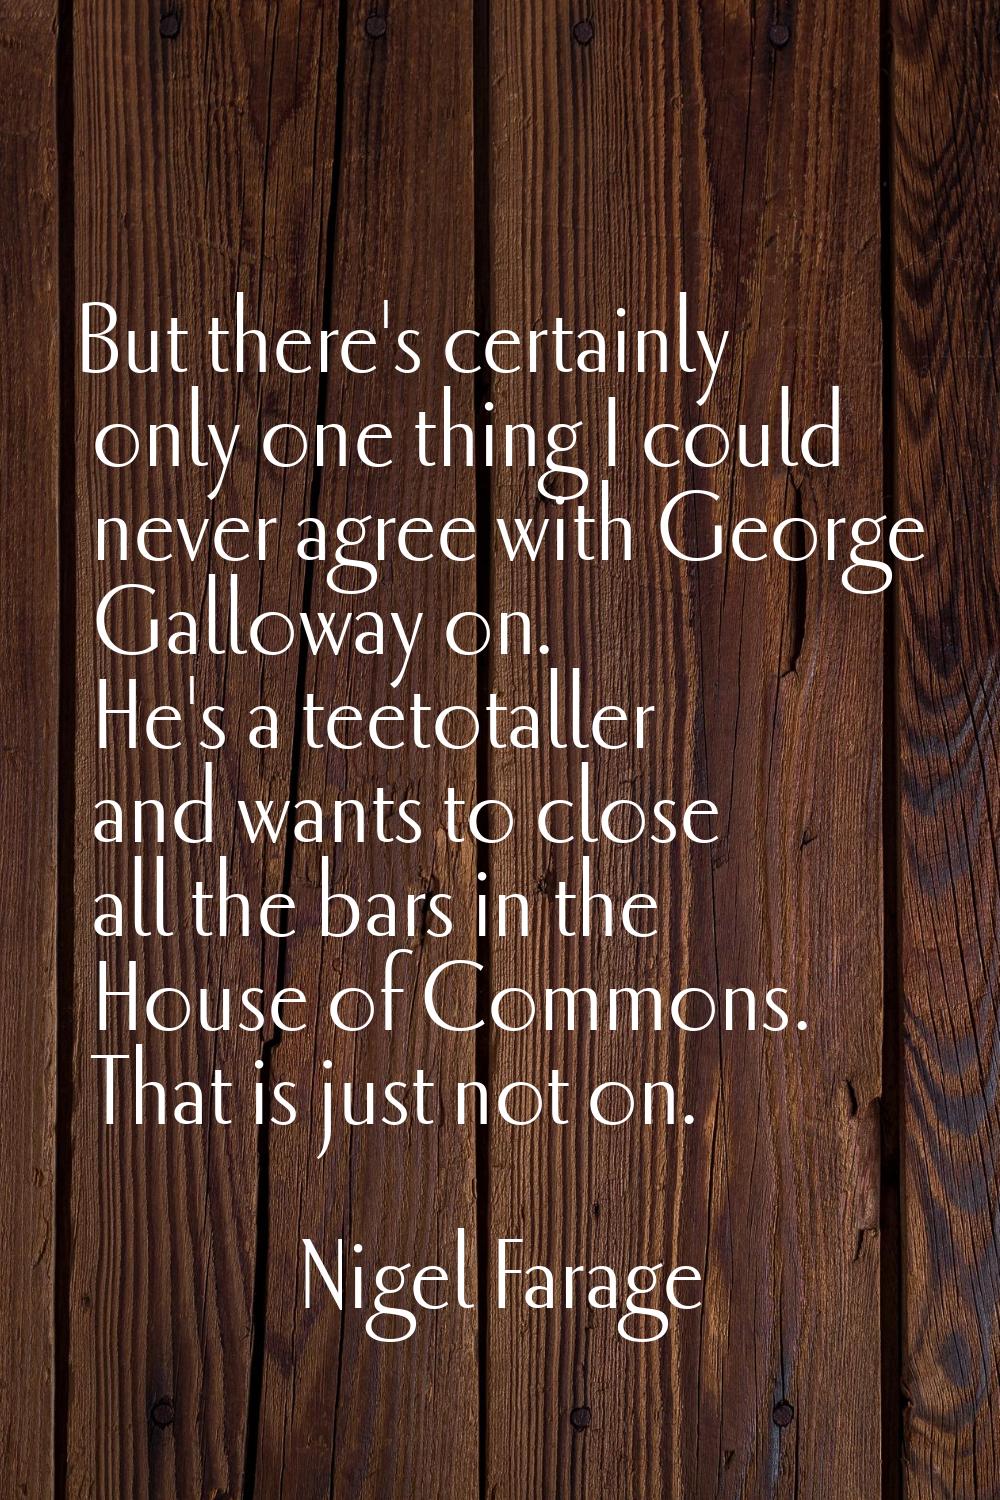 But there's certainly only one thing I could never agree with George Galloway on. He's a teetotalle